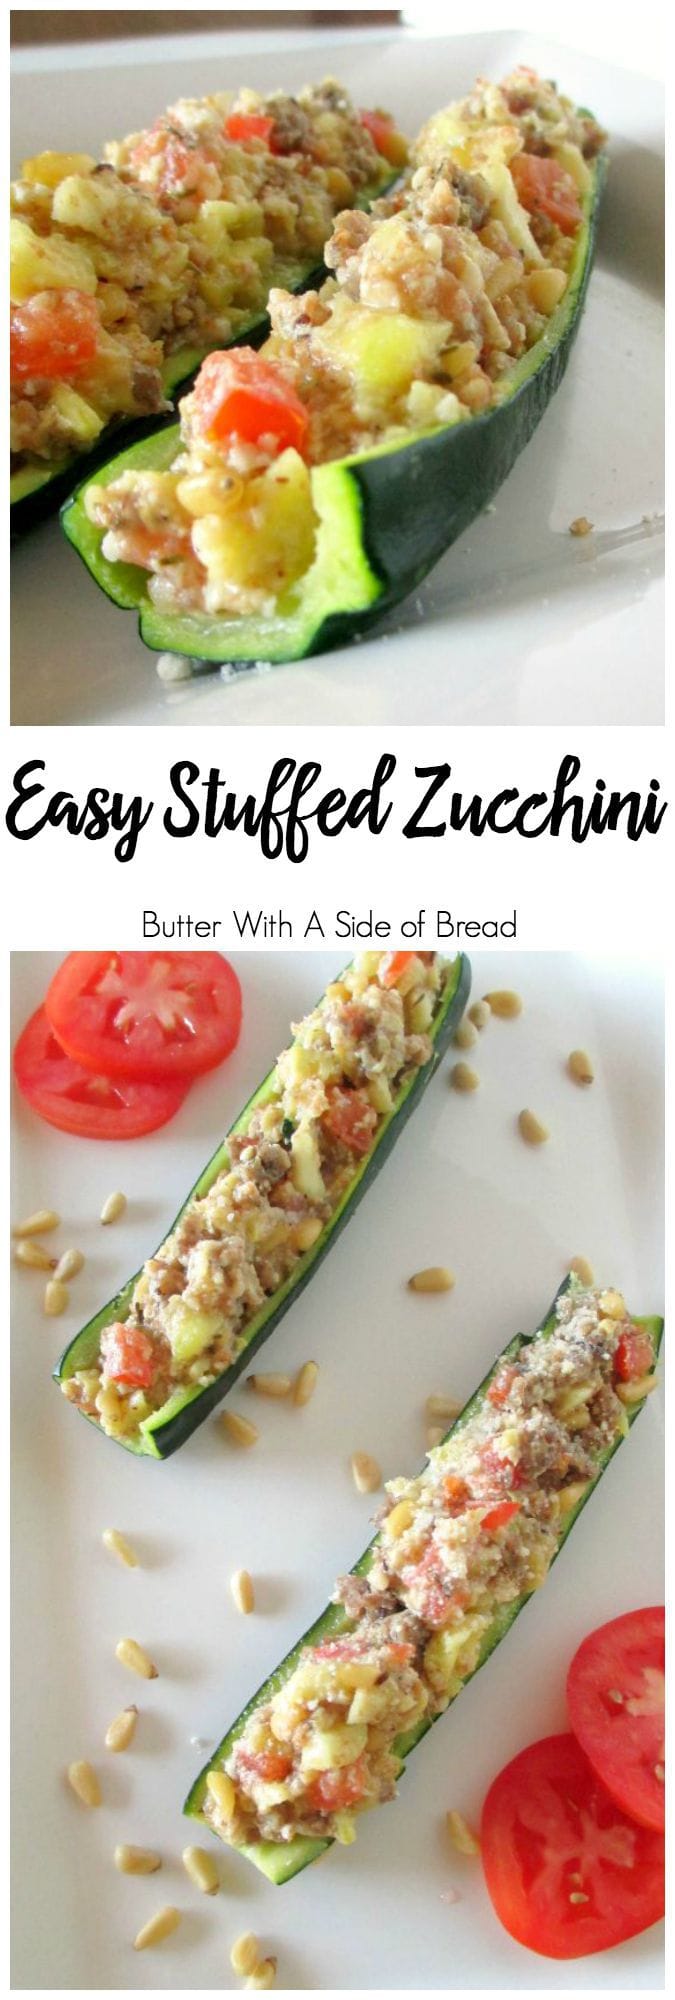 Our Easy Stuffed Zucchini is a simple, flavorful recipe that everyone enjoys. You can make the entire dish in the microwave- or put it on the grill and it's ready in minutes! Easy #zucchini recipe from Butter With A Side of Bread